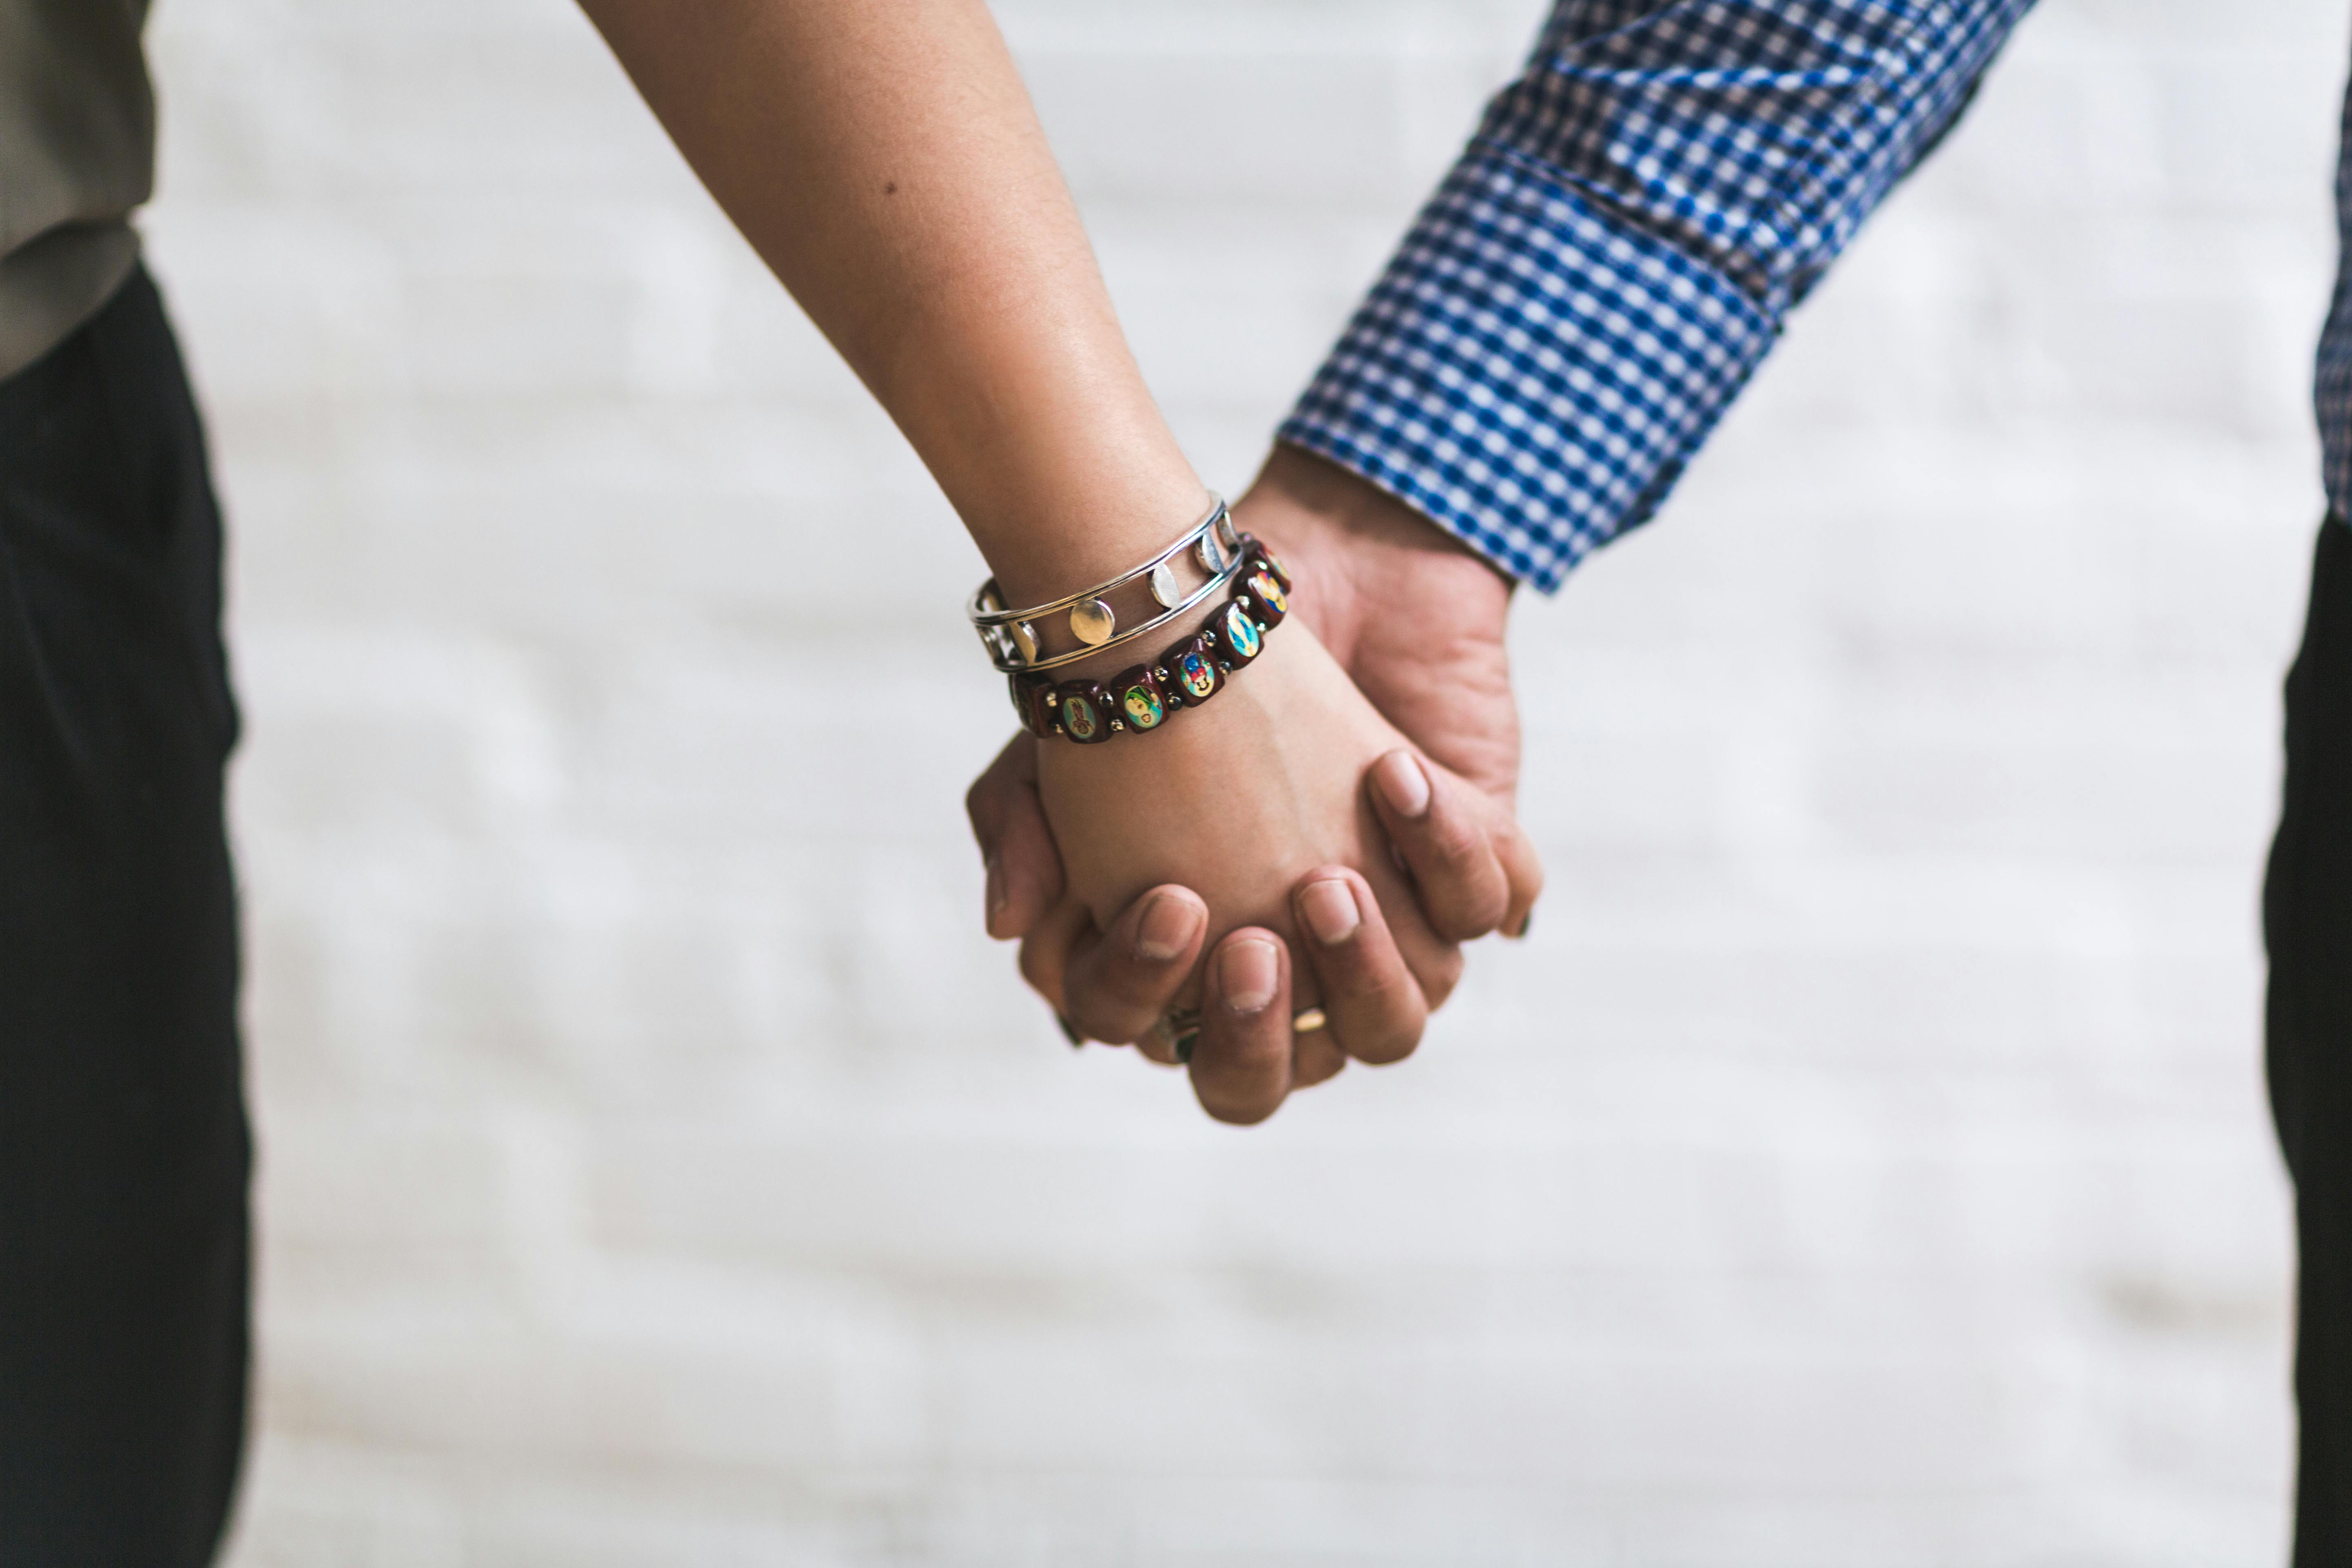 Couple Holding Hands Near White Painted Wall Free Stock Photo